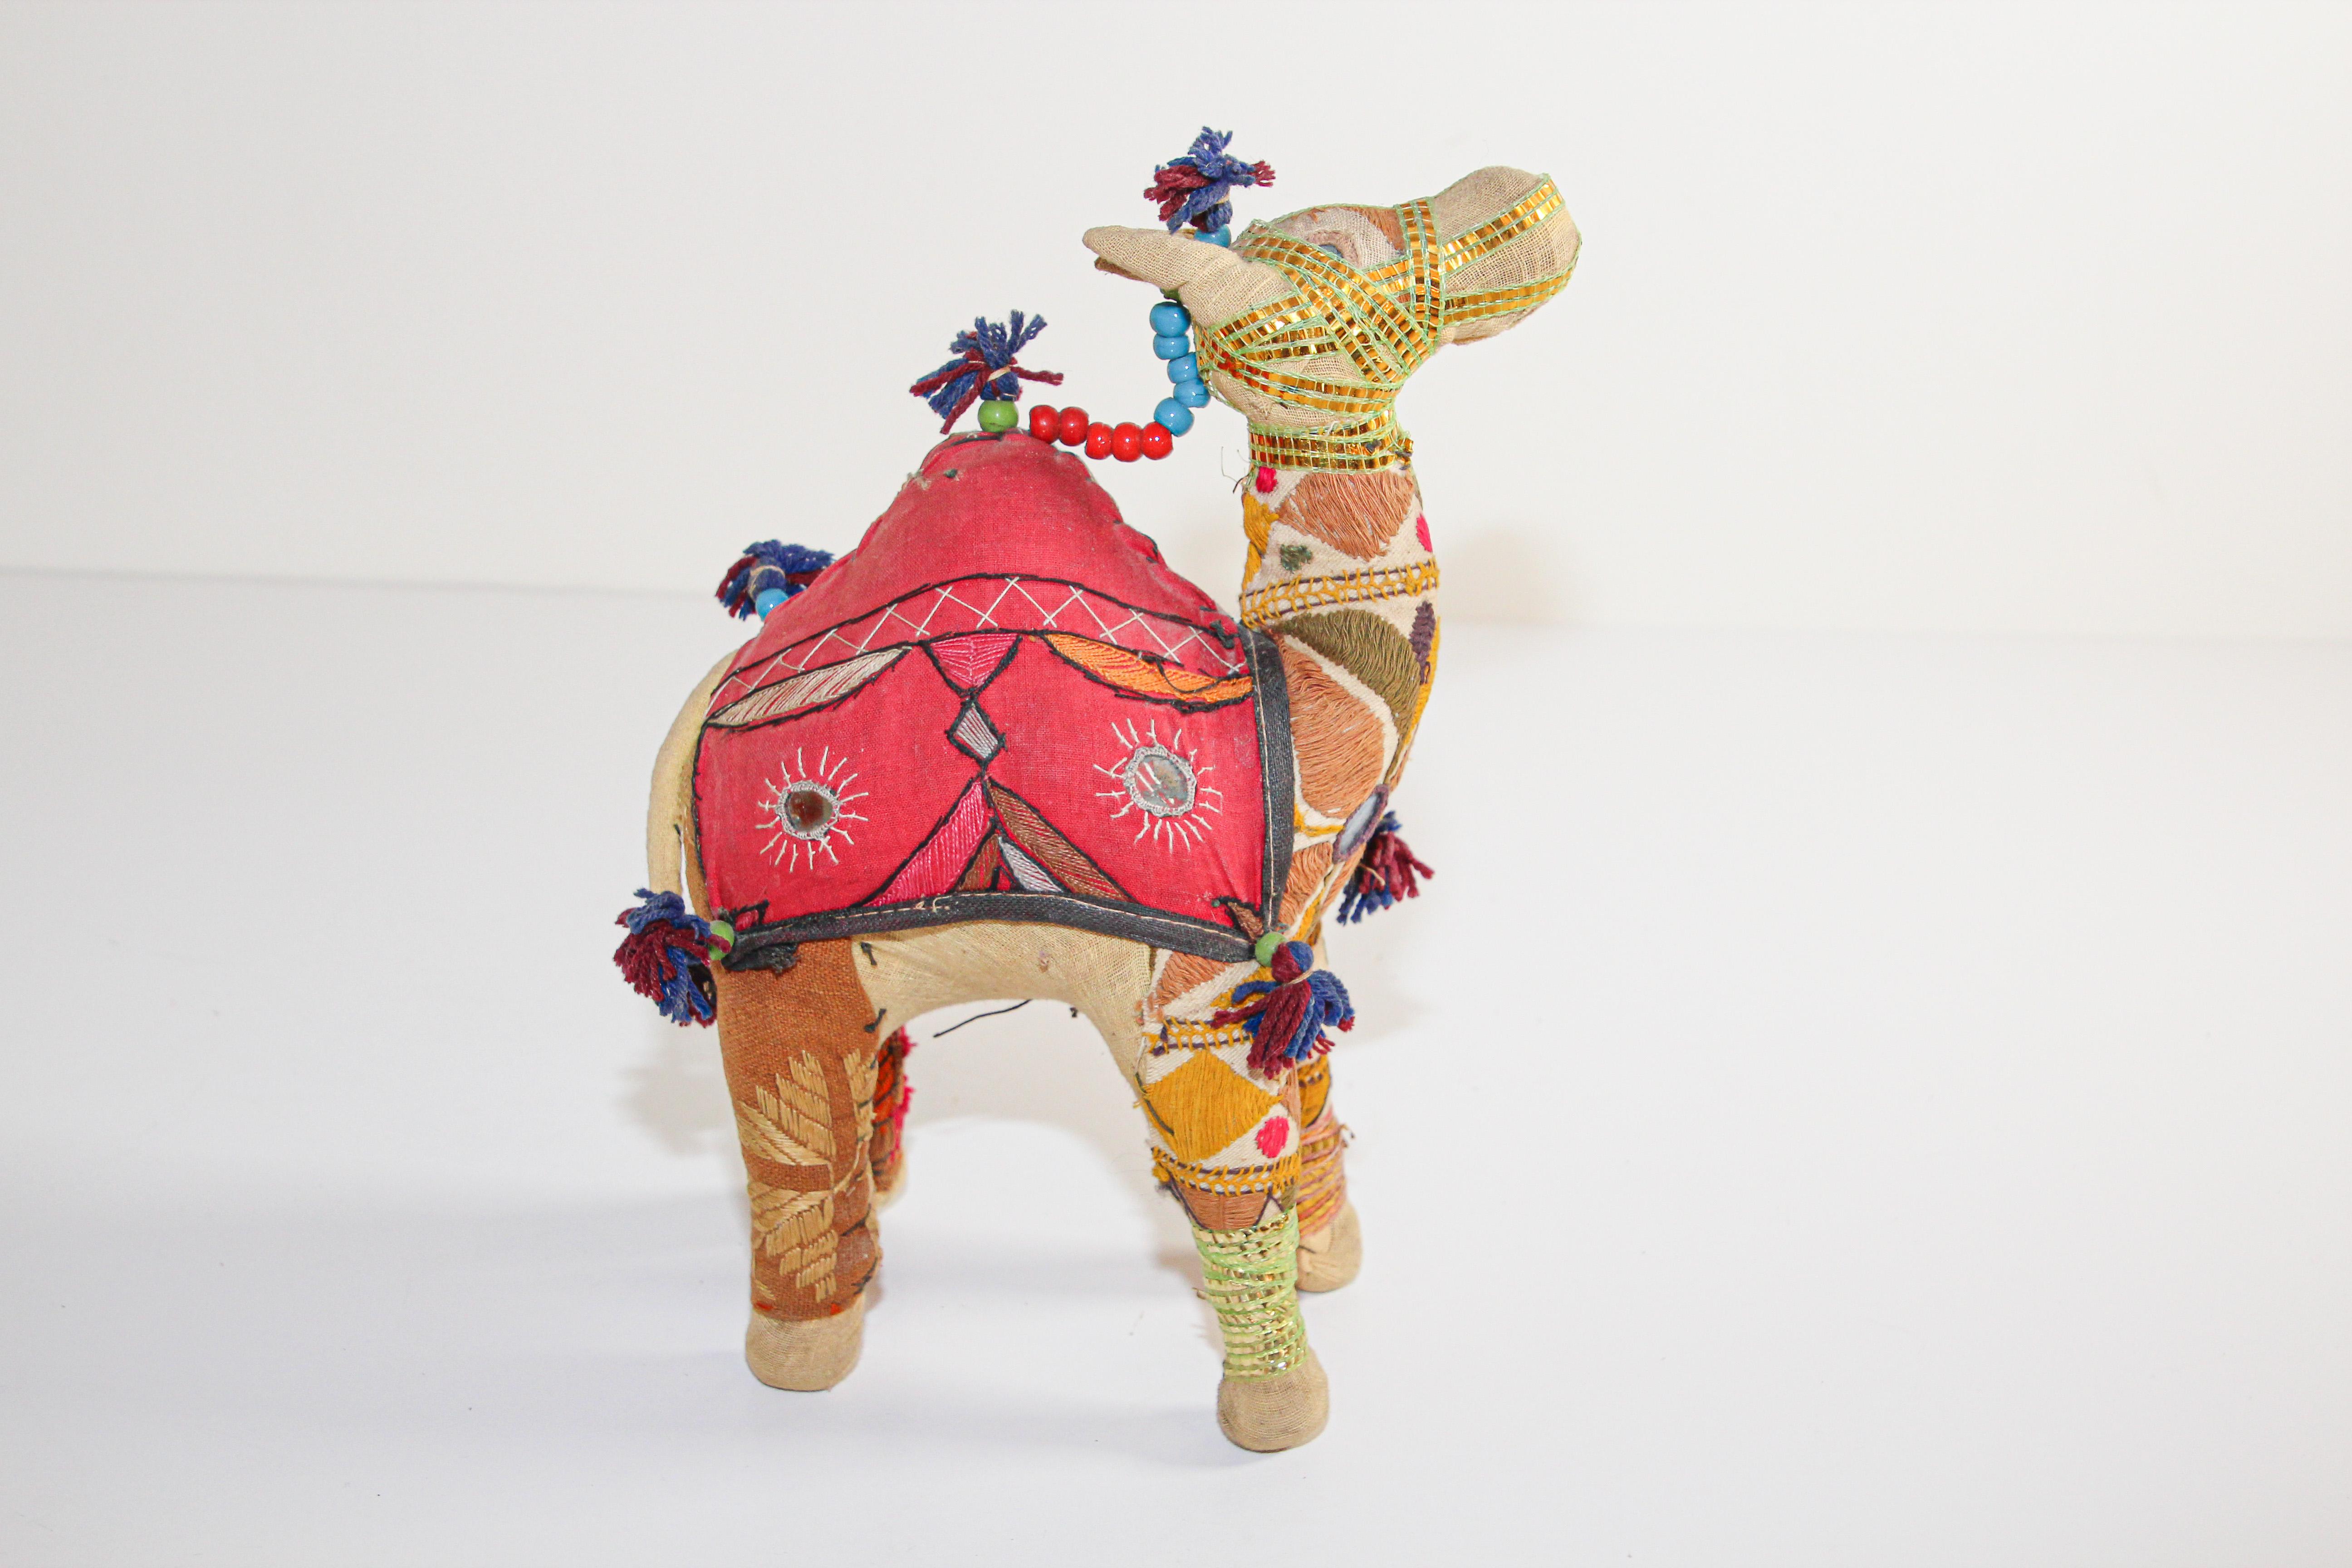 Hand-Crafted Handcrafted Vintage Stuffed Cotton Embroidered Camel Toy, India, 1950